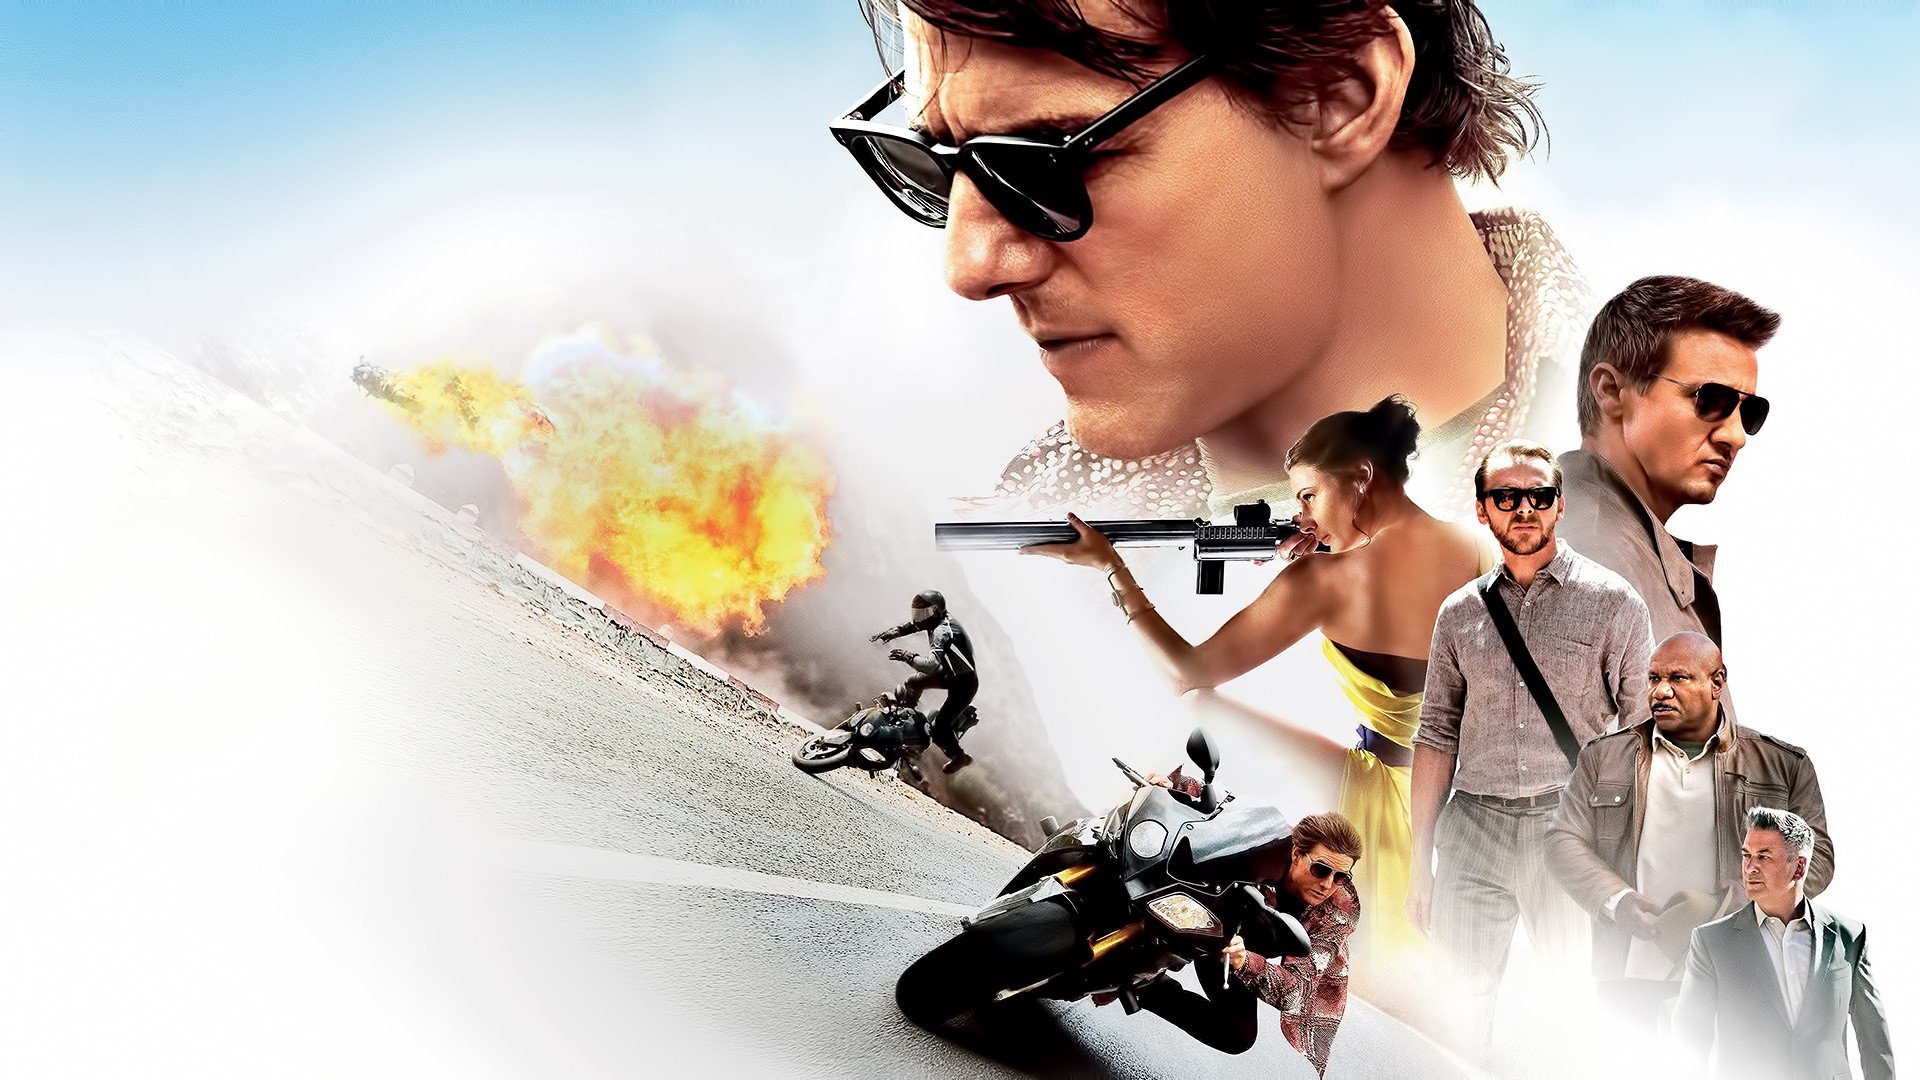 Mission Impossible Rogue Nation, Tom Cruise, Jeremy Renner Wallpaper